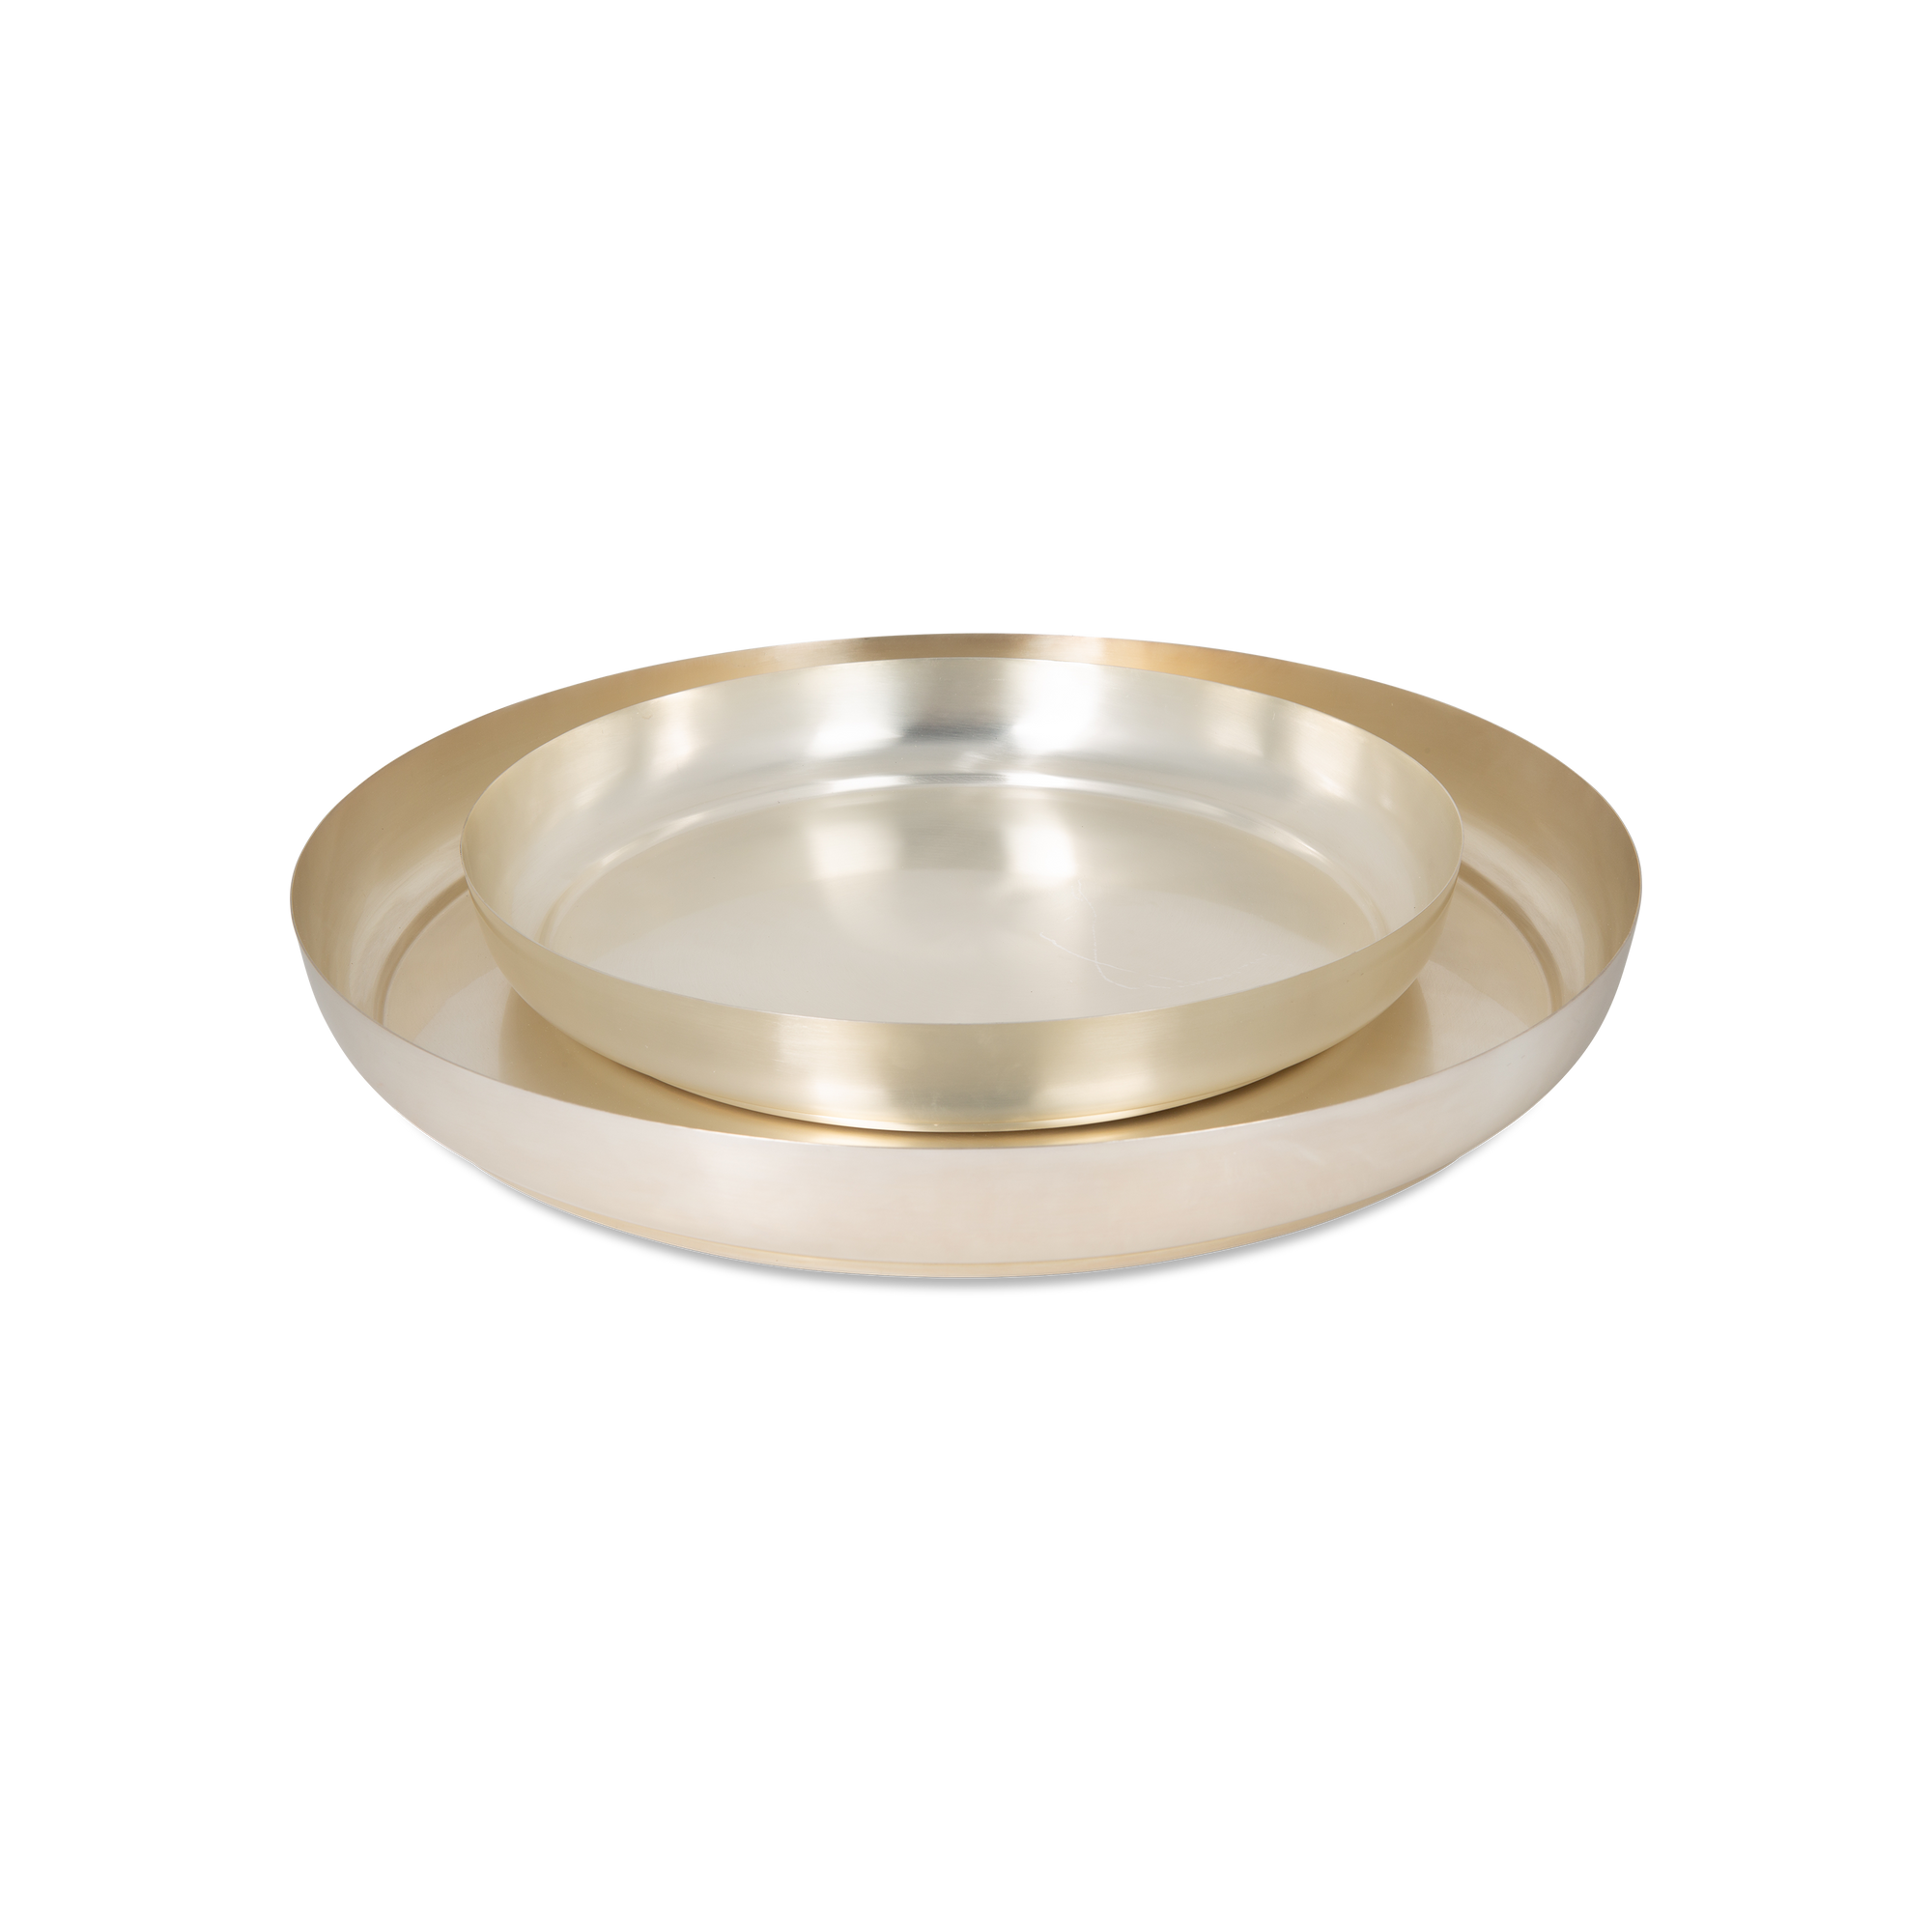 These elegant silver-plated steel platters can be nested or displayed individually.